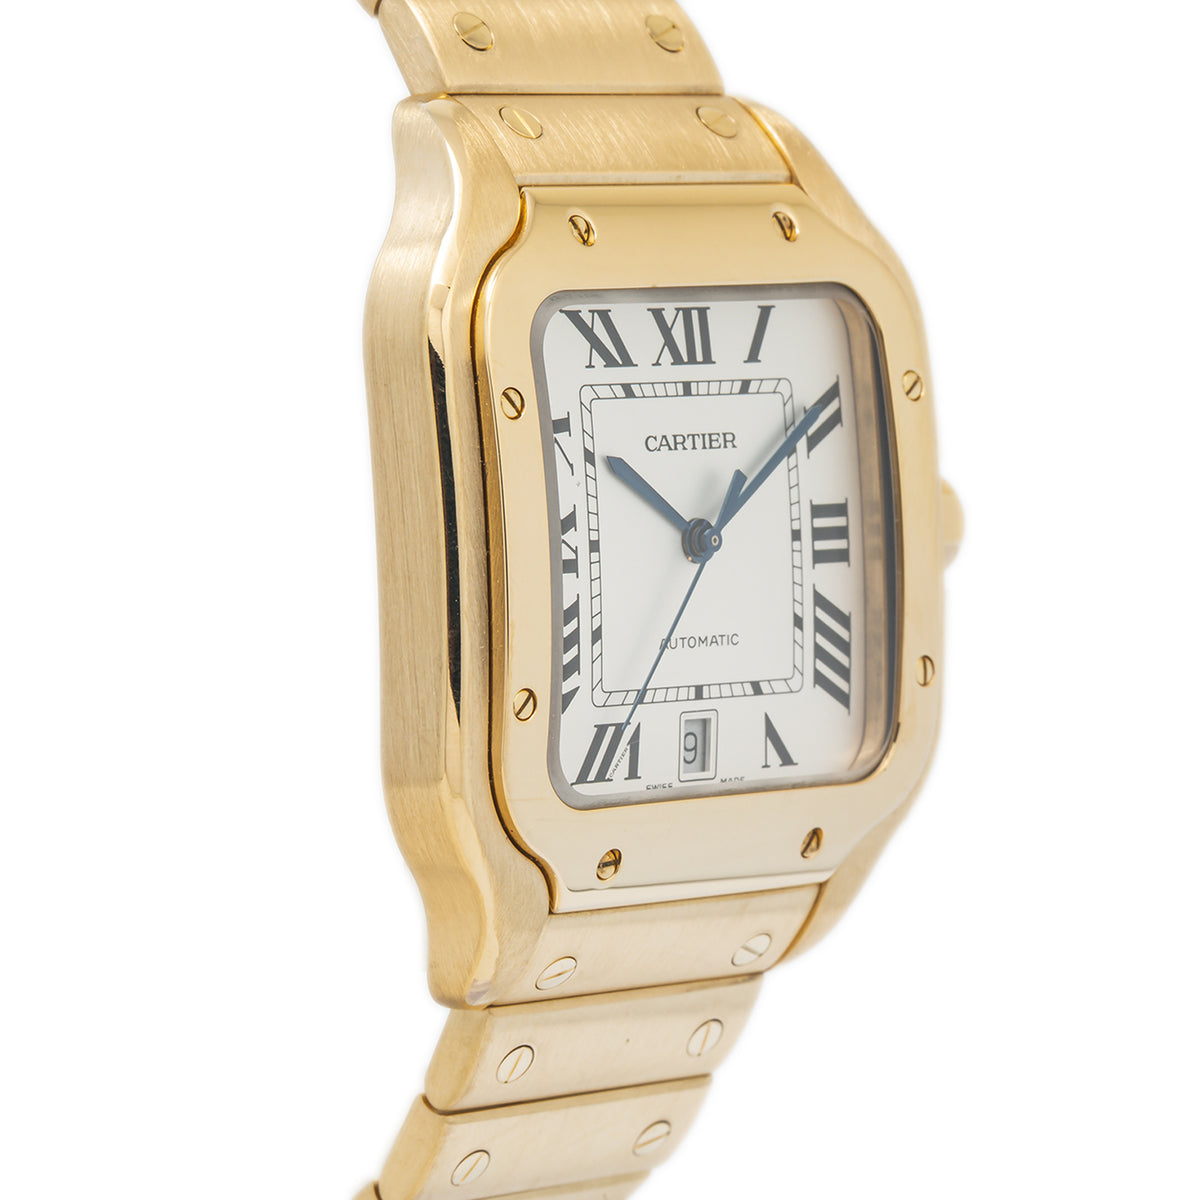 Cartier Santos WGSA0029 4070 Large 18k Yellow Gold Date Automatic Watch 40mm